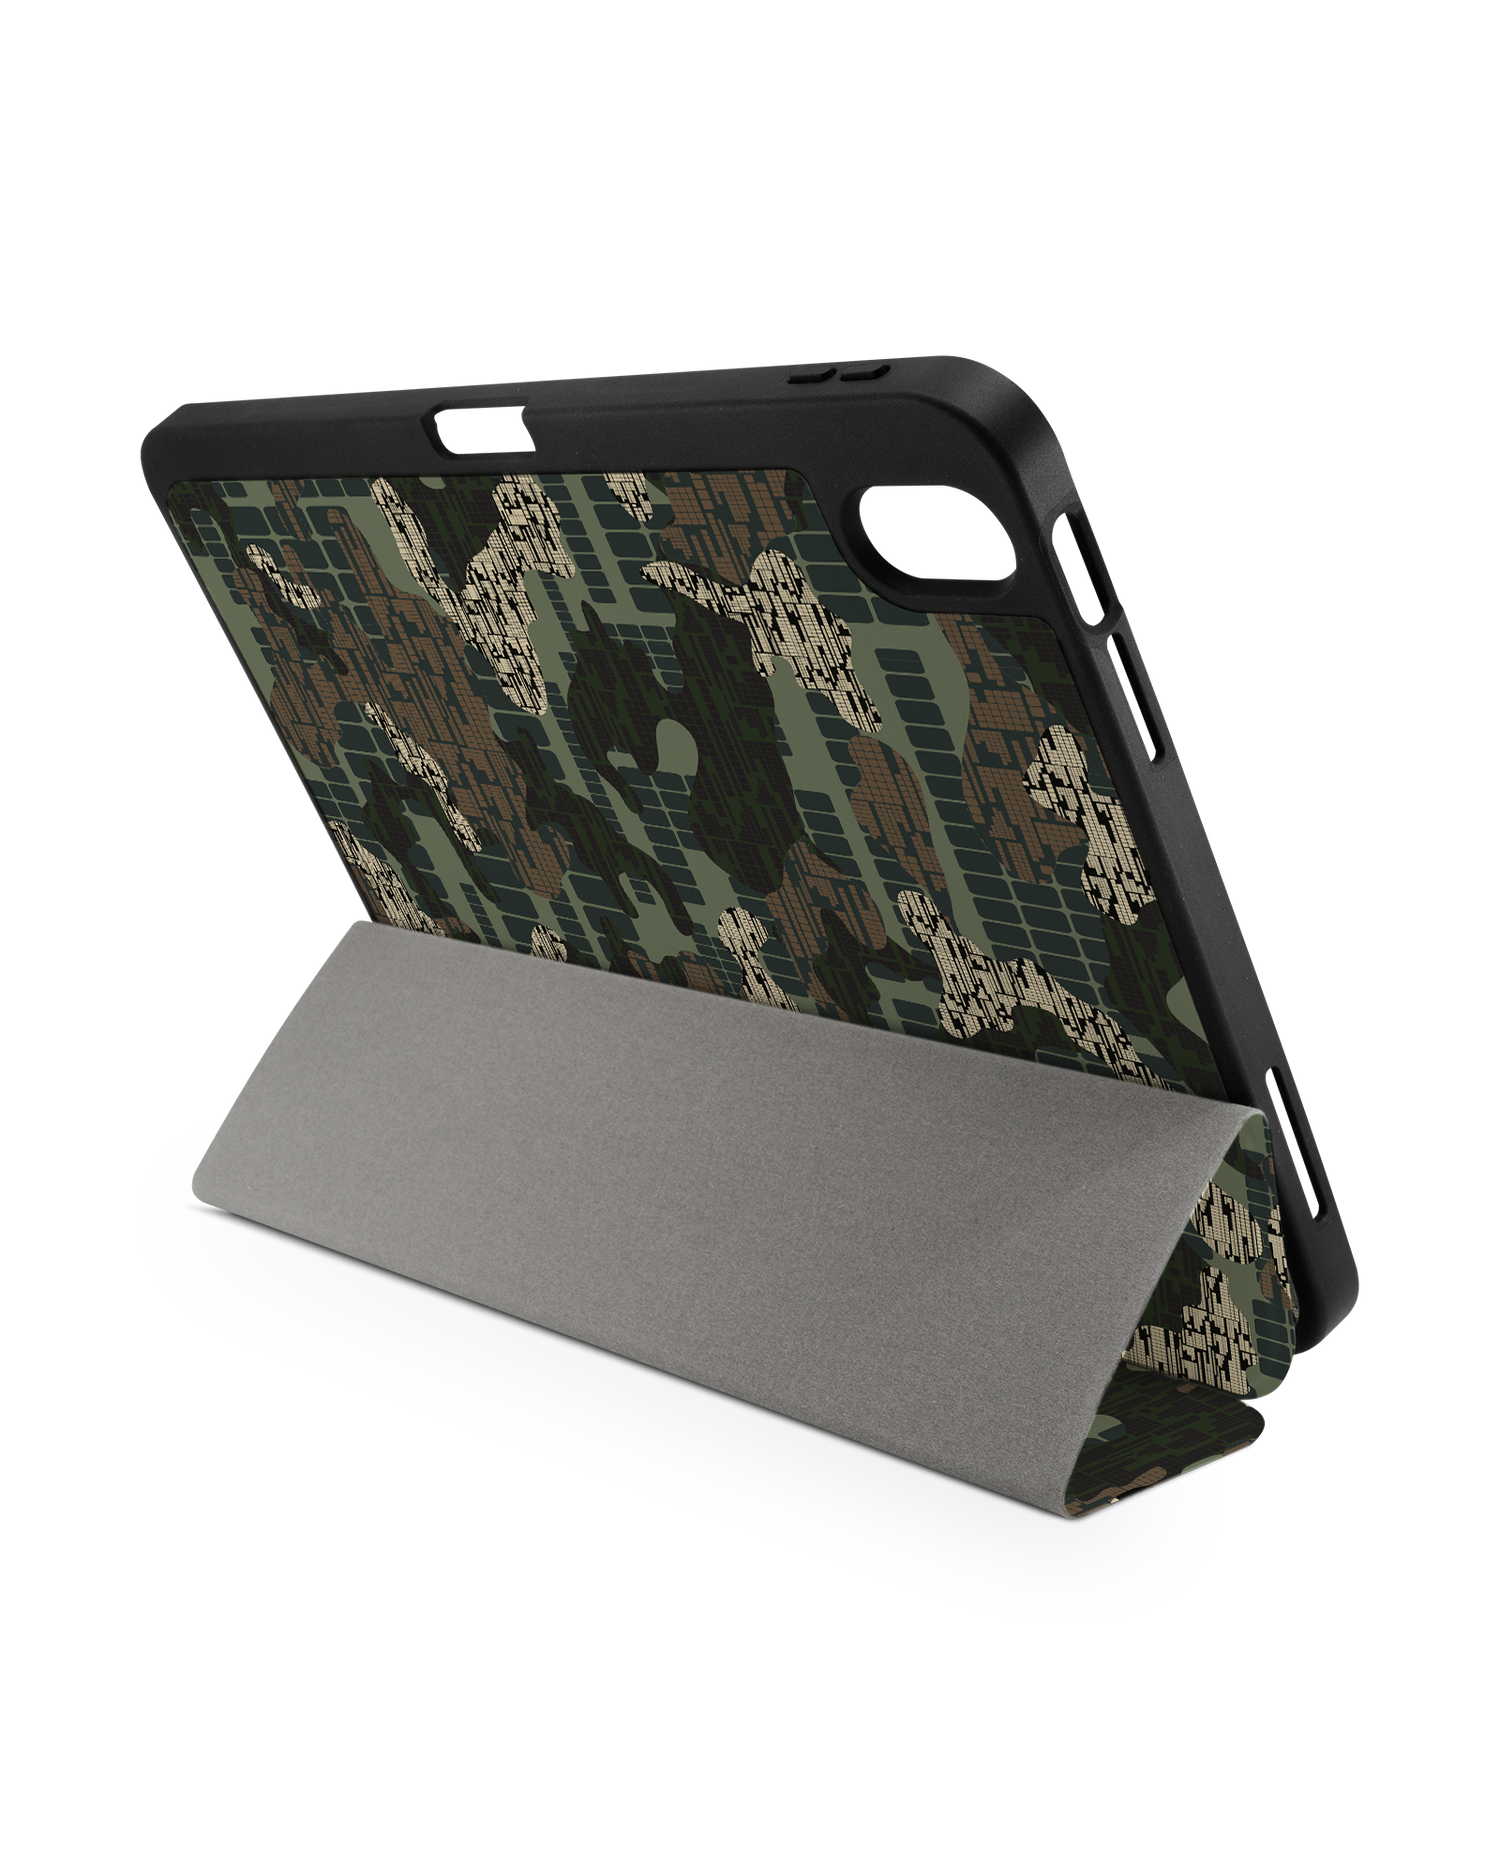 Green Camo Mix iPad Case with Pencil Holder for Apple iPad (10th Generation): Set up in landscape format (back view)